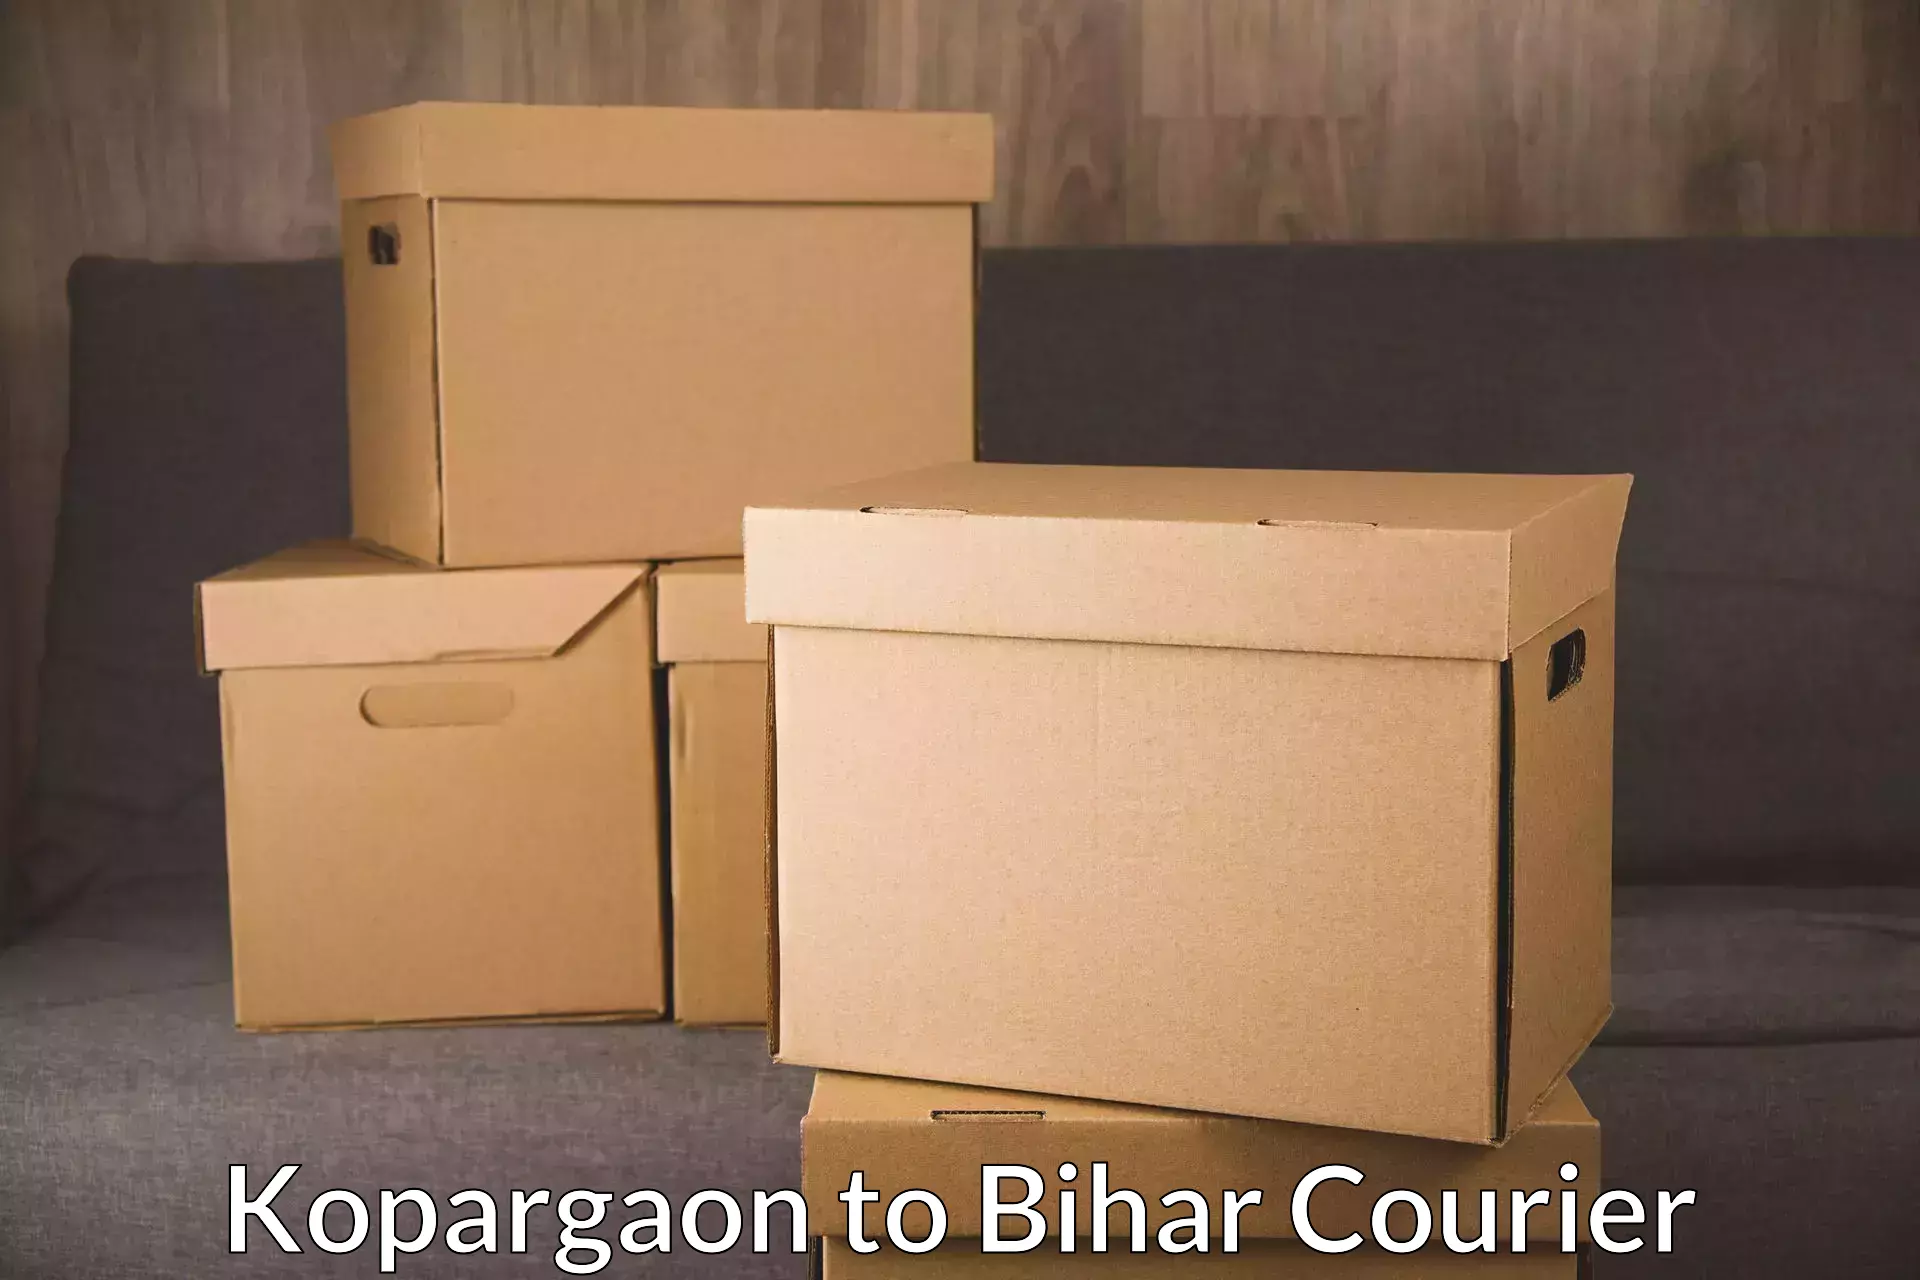 24-hour courier services in Kopargaon to Katihar